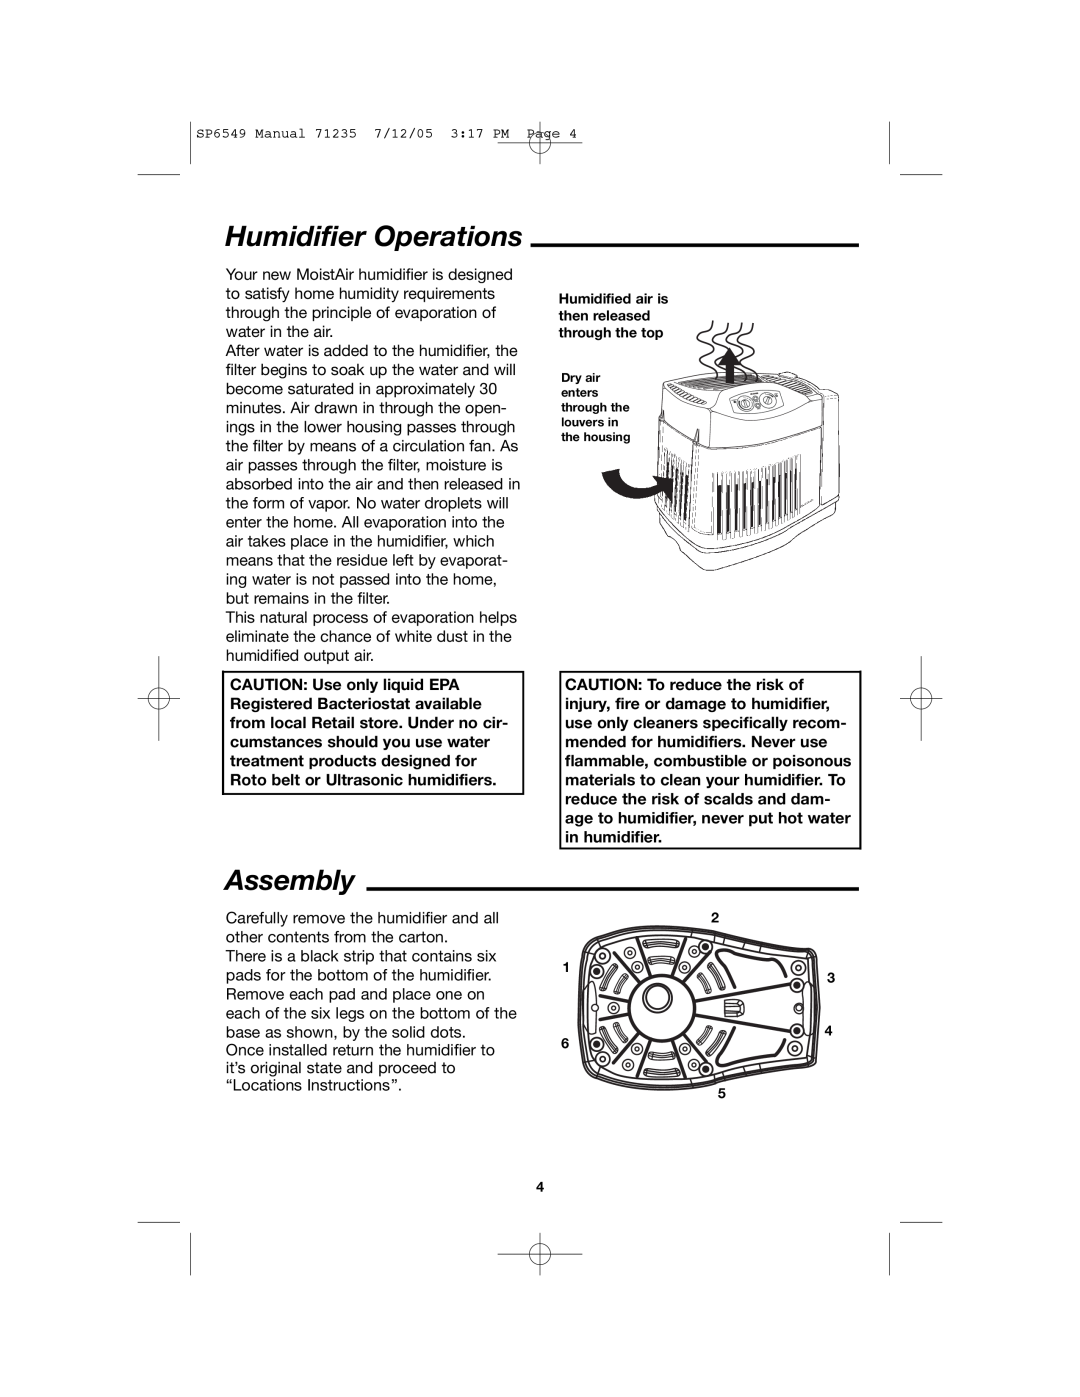 MoistAir MA 0950 owner manual Humidifier Operations, Assembly, Humidified air is then released through the top 